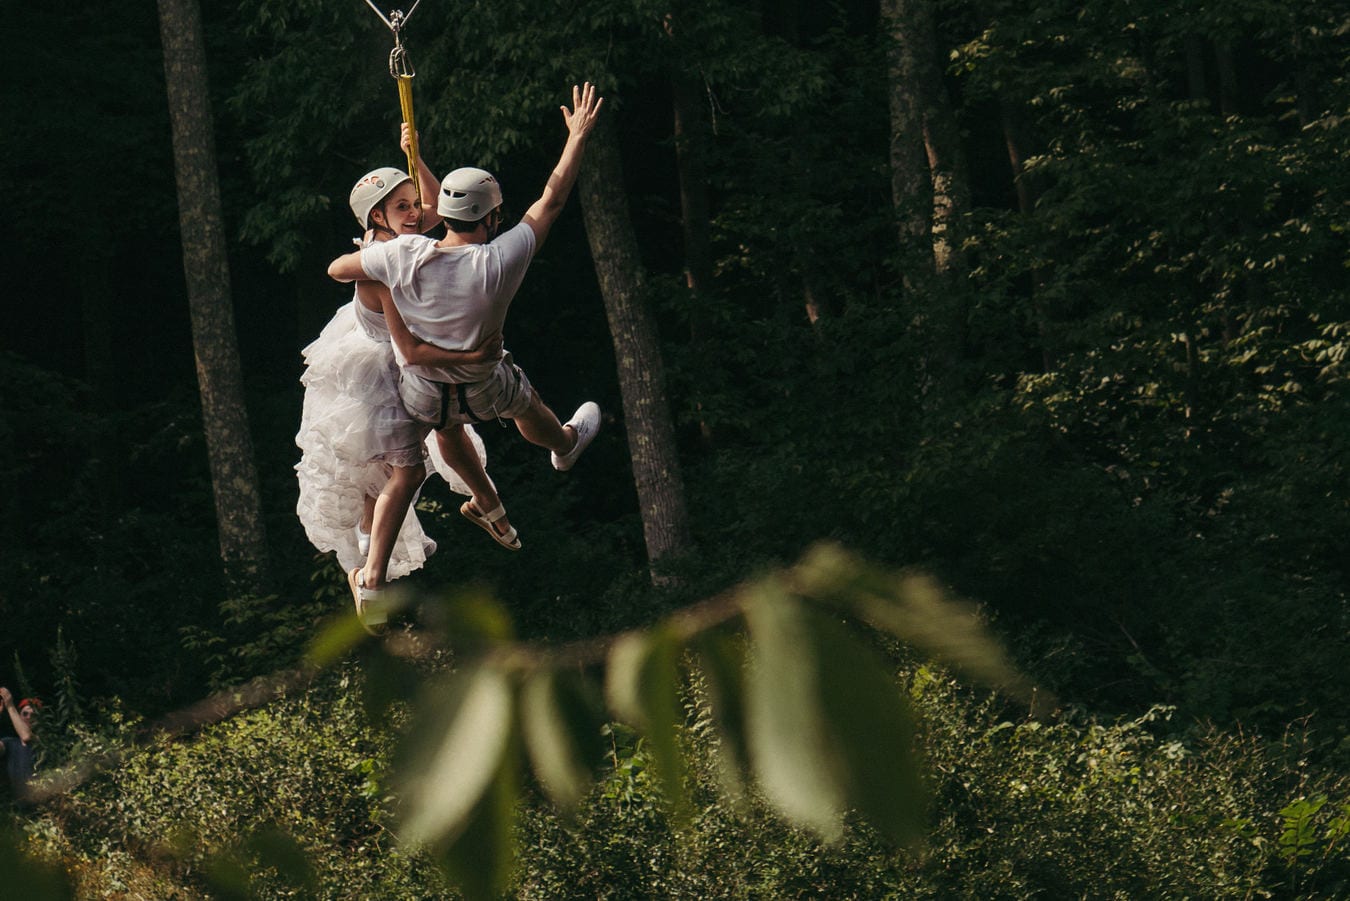 Bride and groom ride zip line through Catskill forest after wedding ceremony.